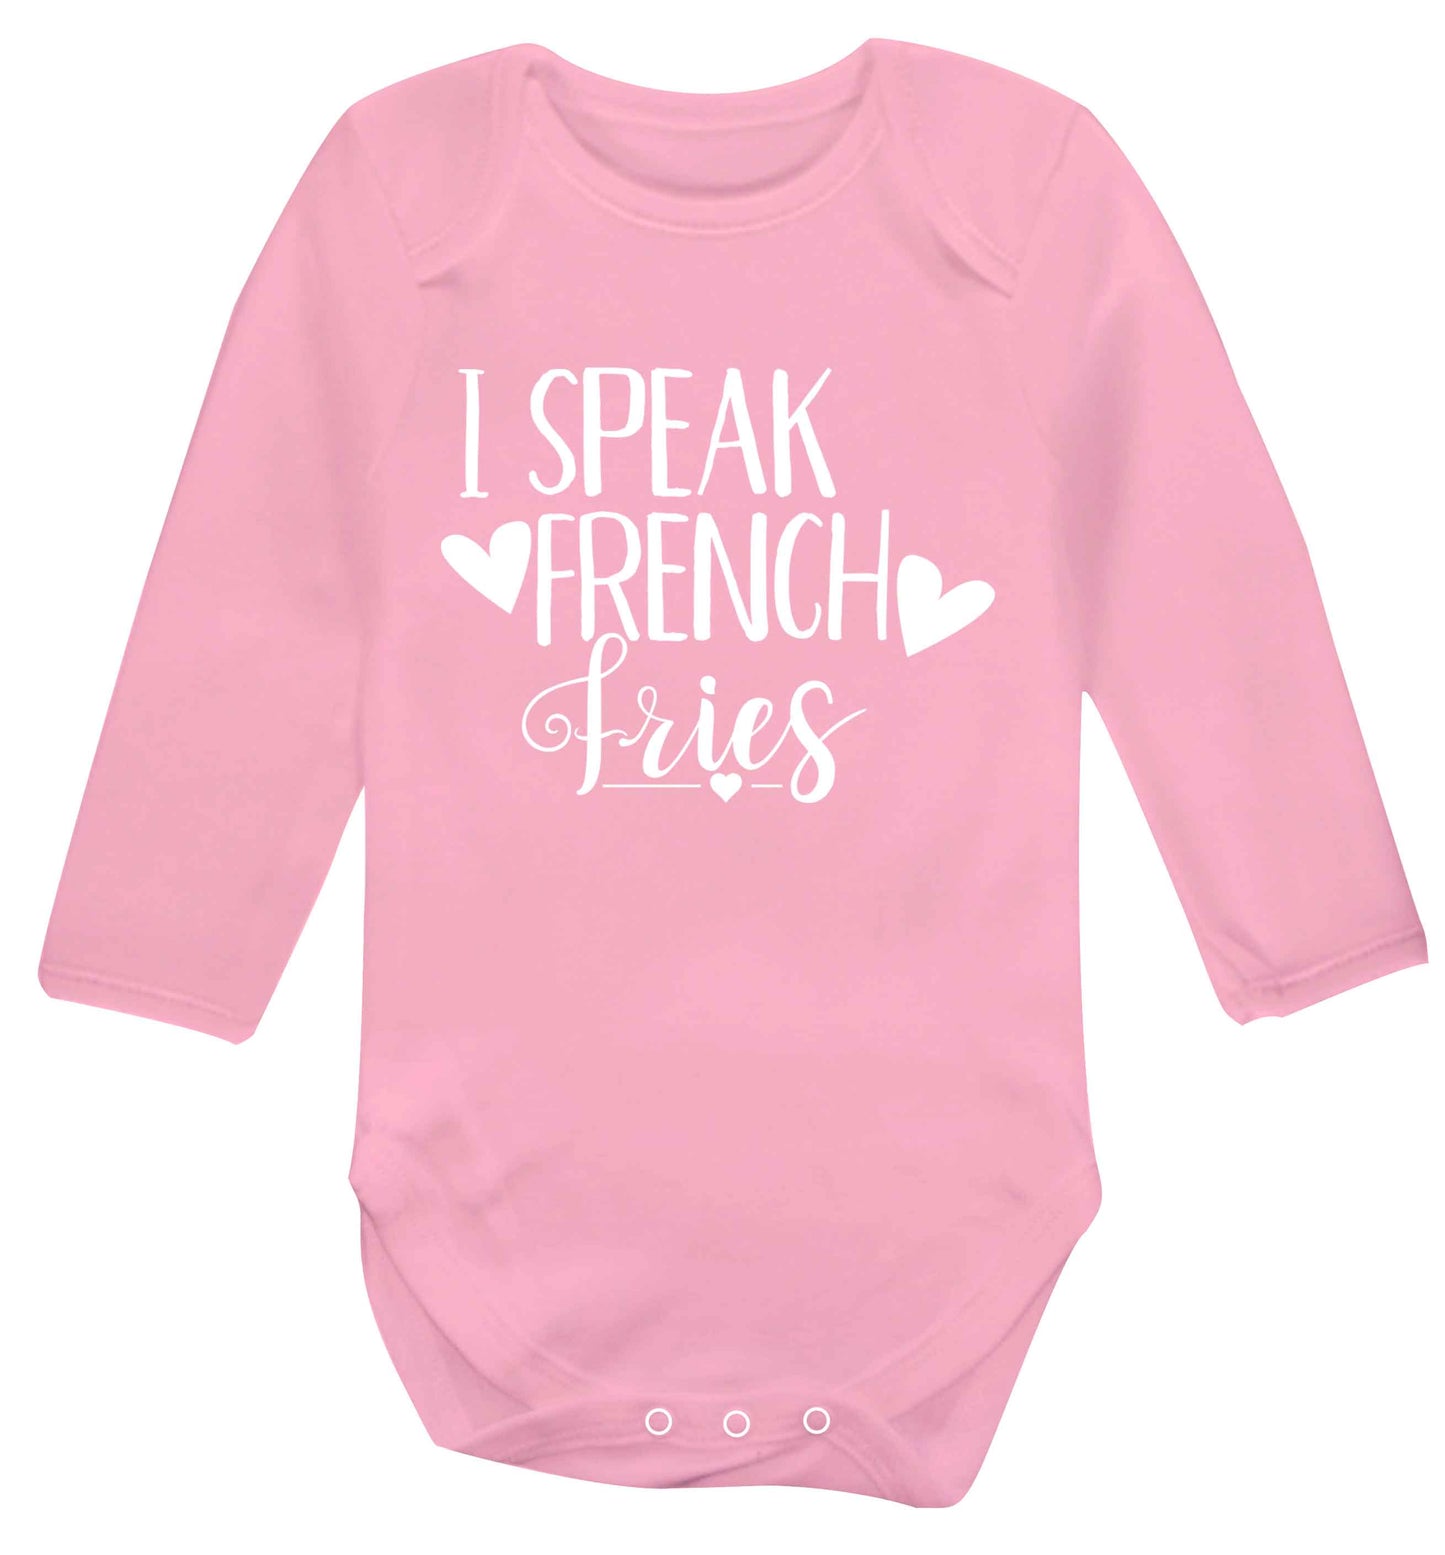 I speak French fries Baby Vest long sleeved pale pink 6-12 months